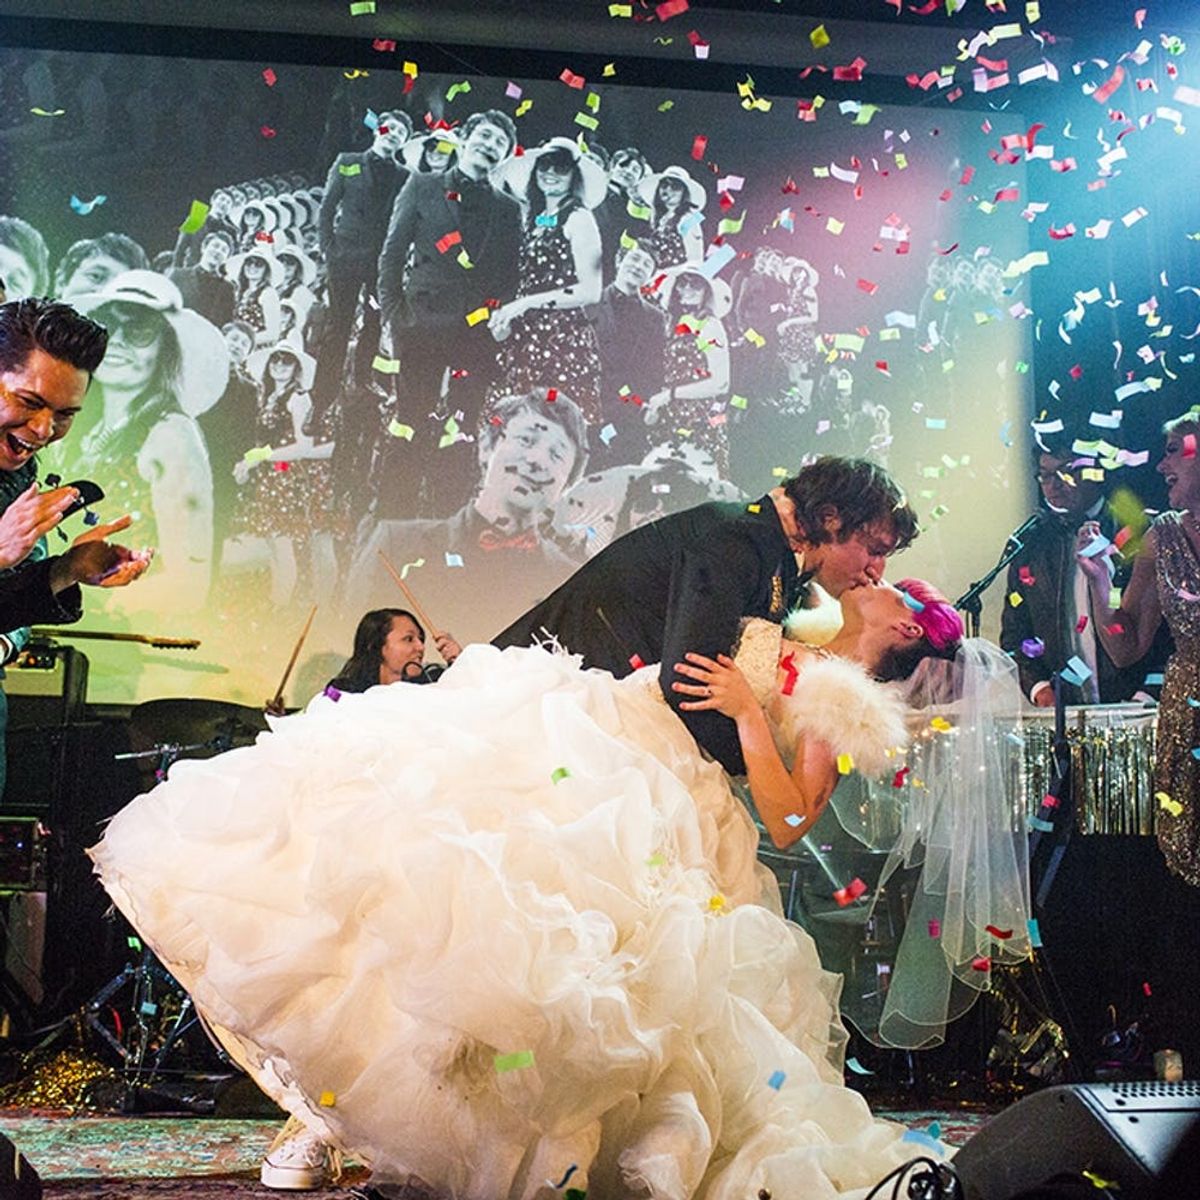 How This Couple Turned Their Wedding into an Epic Rock Opera